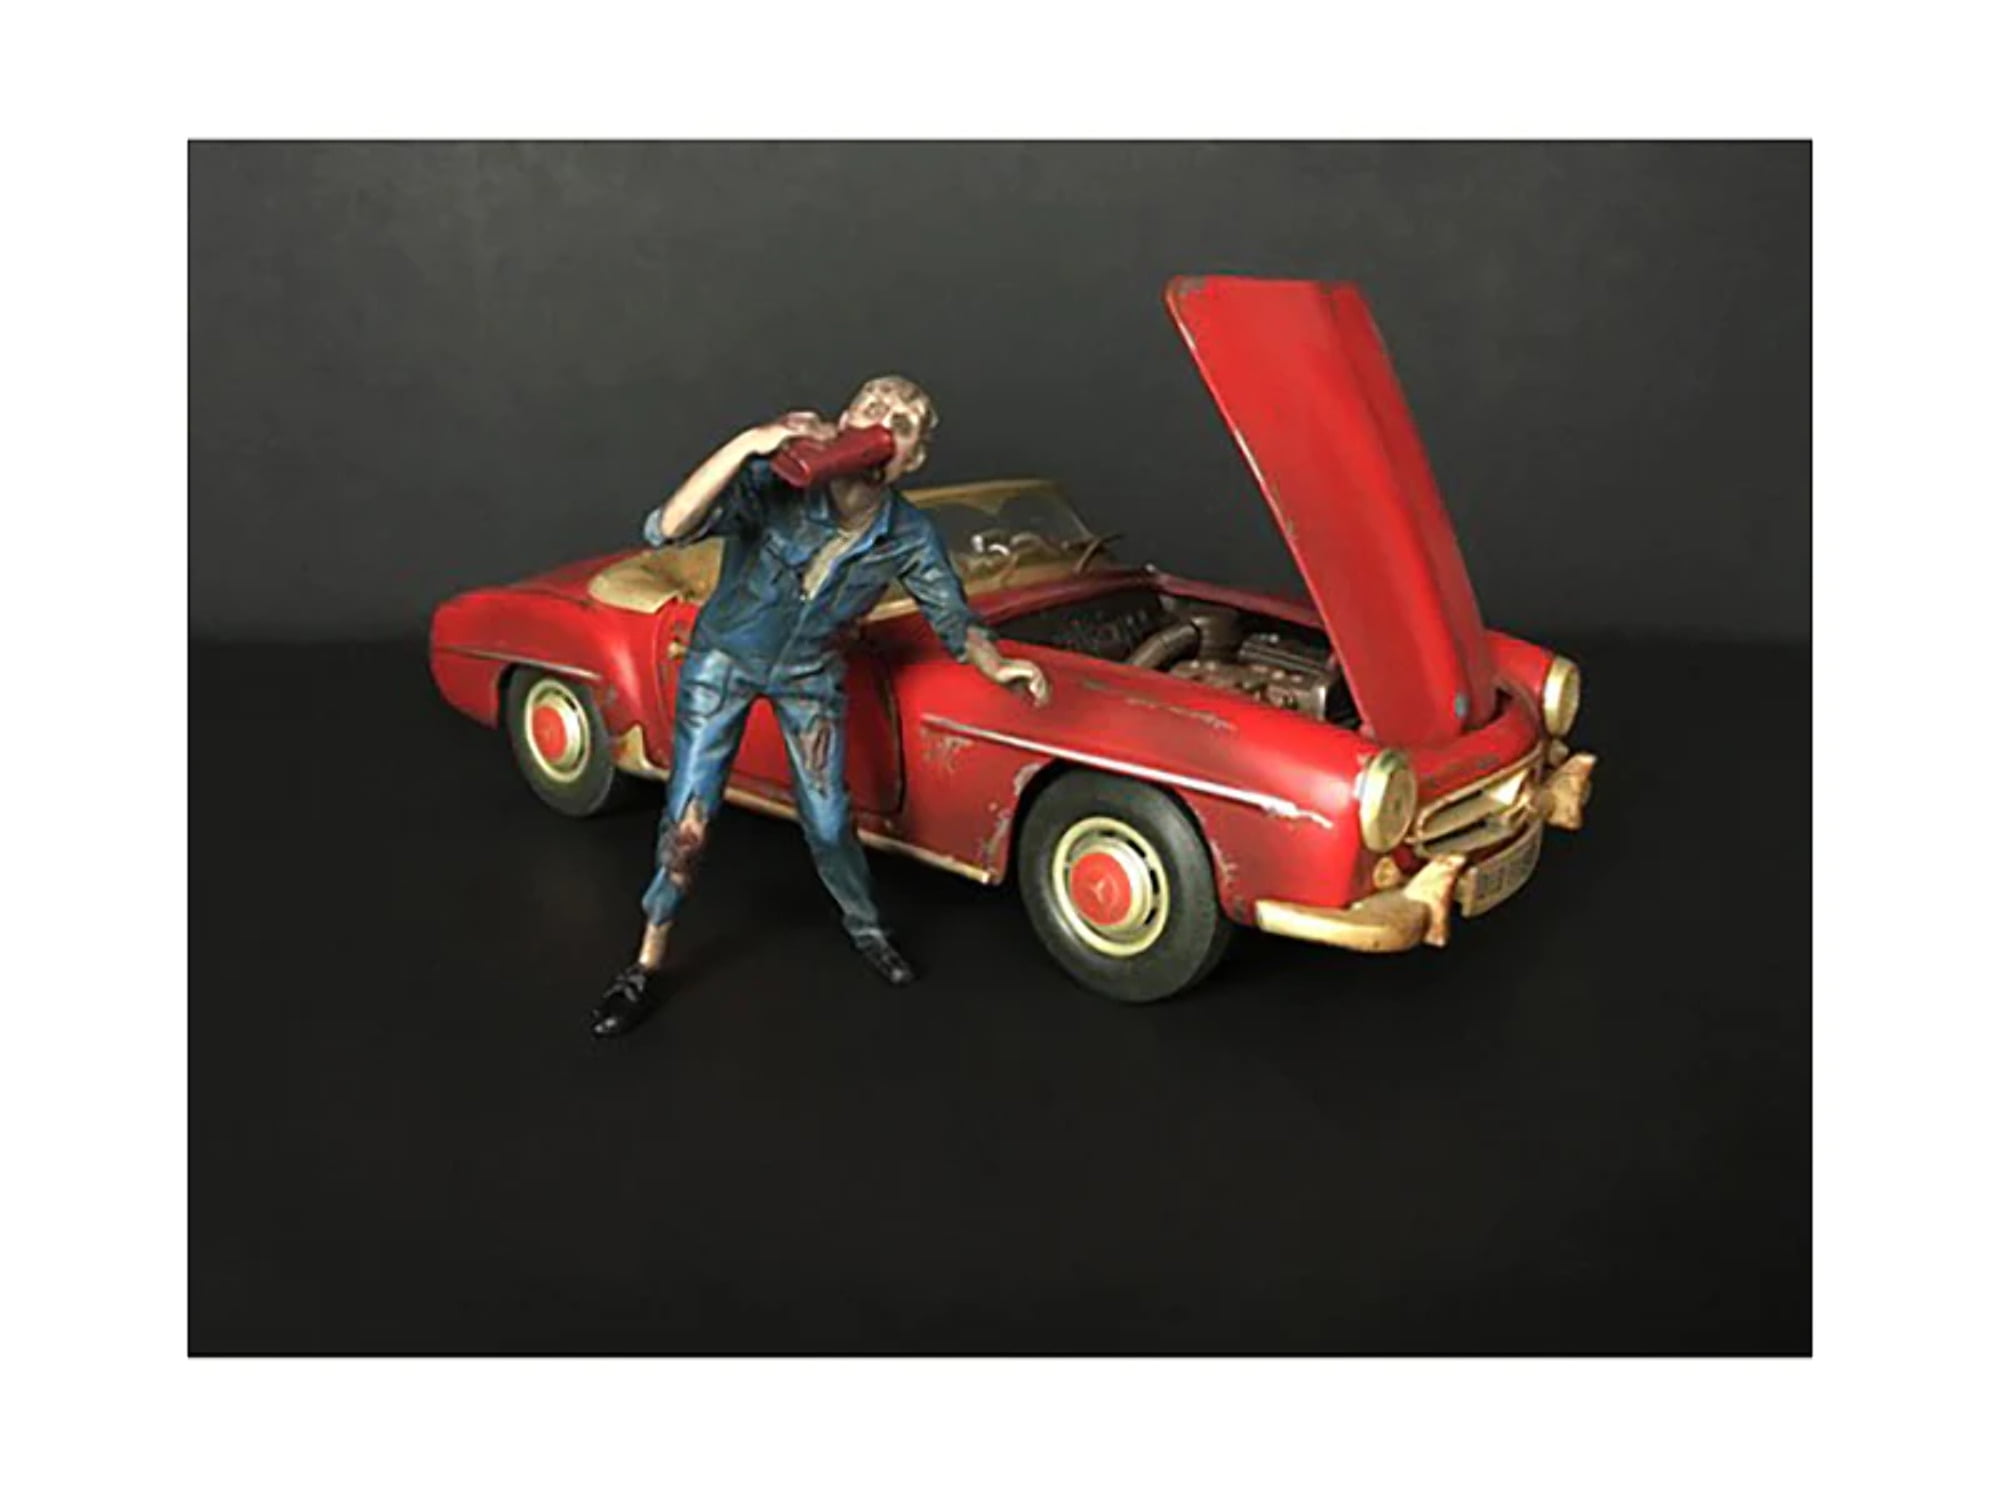 38299 Zombie Mechanic Figurine Iii For 1 By 24 Scale Models